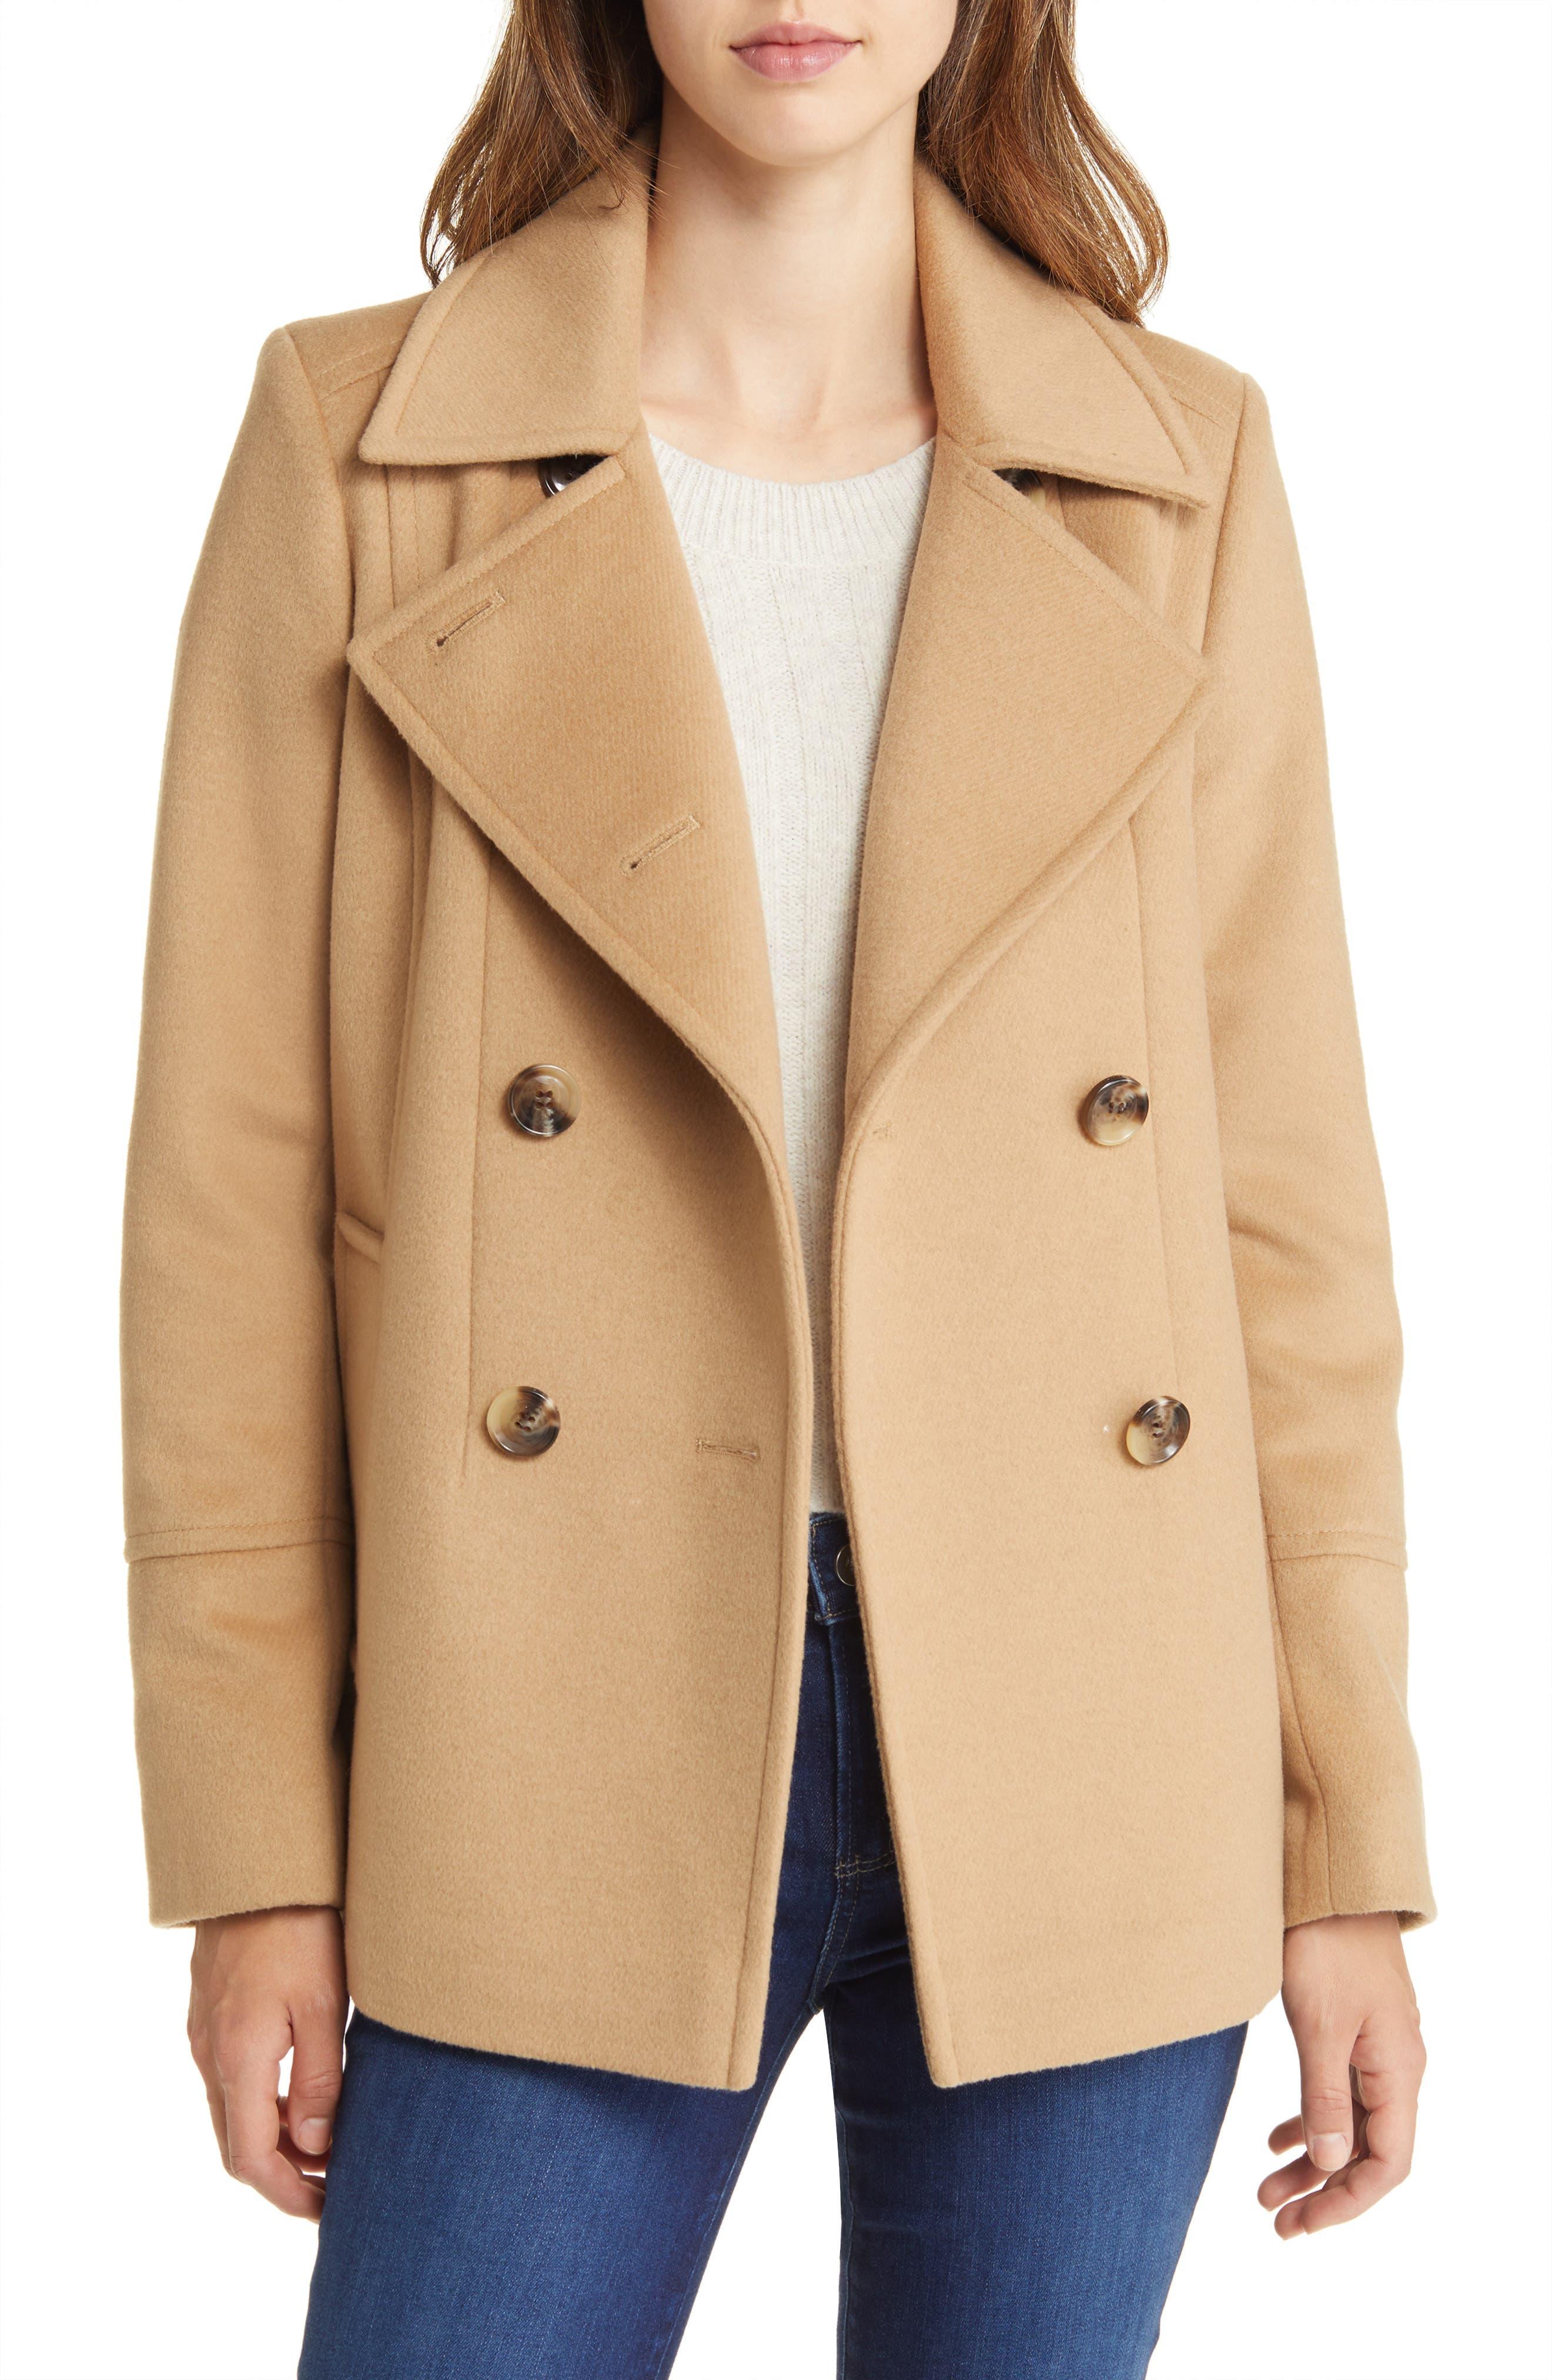 Thread & Supply Wool Blend Peacoat XL Camel Tan Extra Large Outer